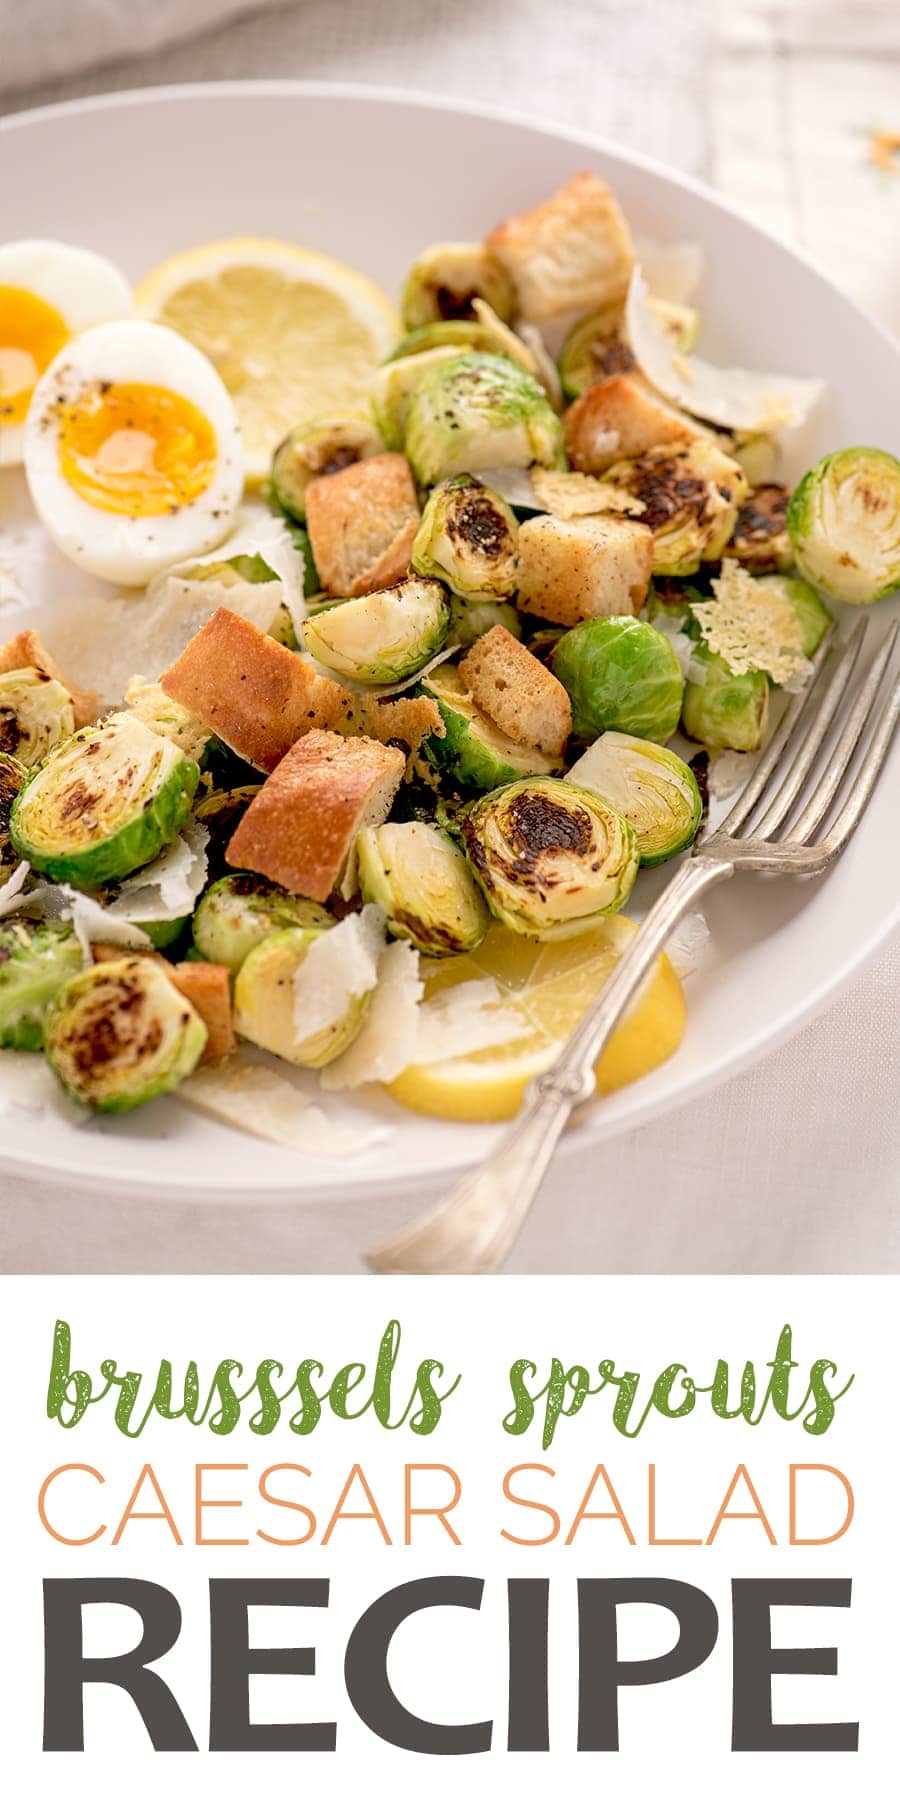 Charred Brussels Sprouts Caesar Salad - Charred Brussels Sprouts Caesar Salad